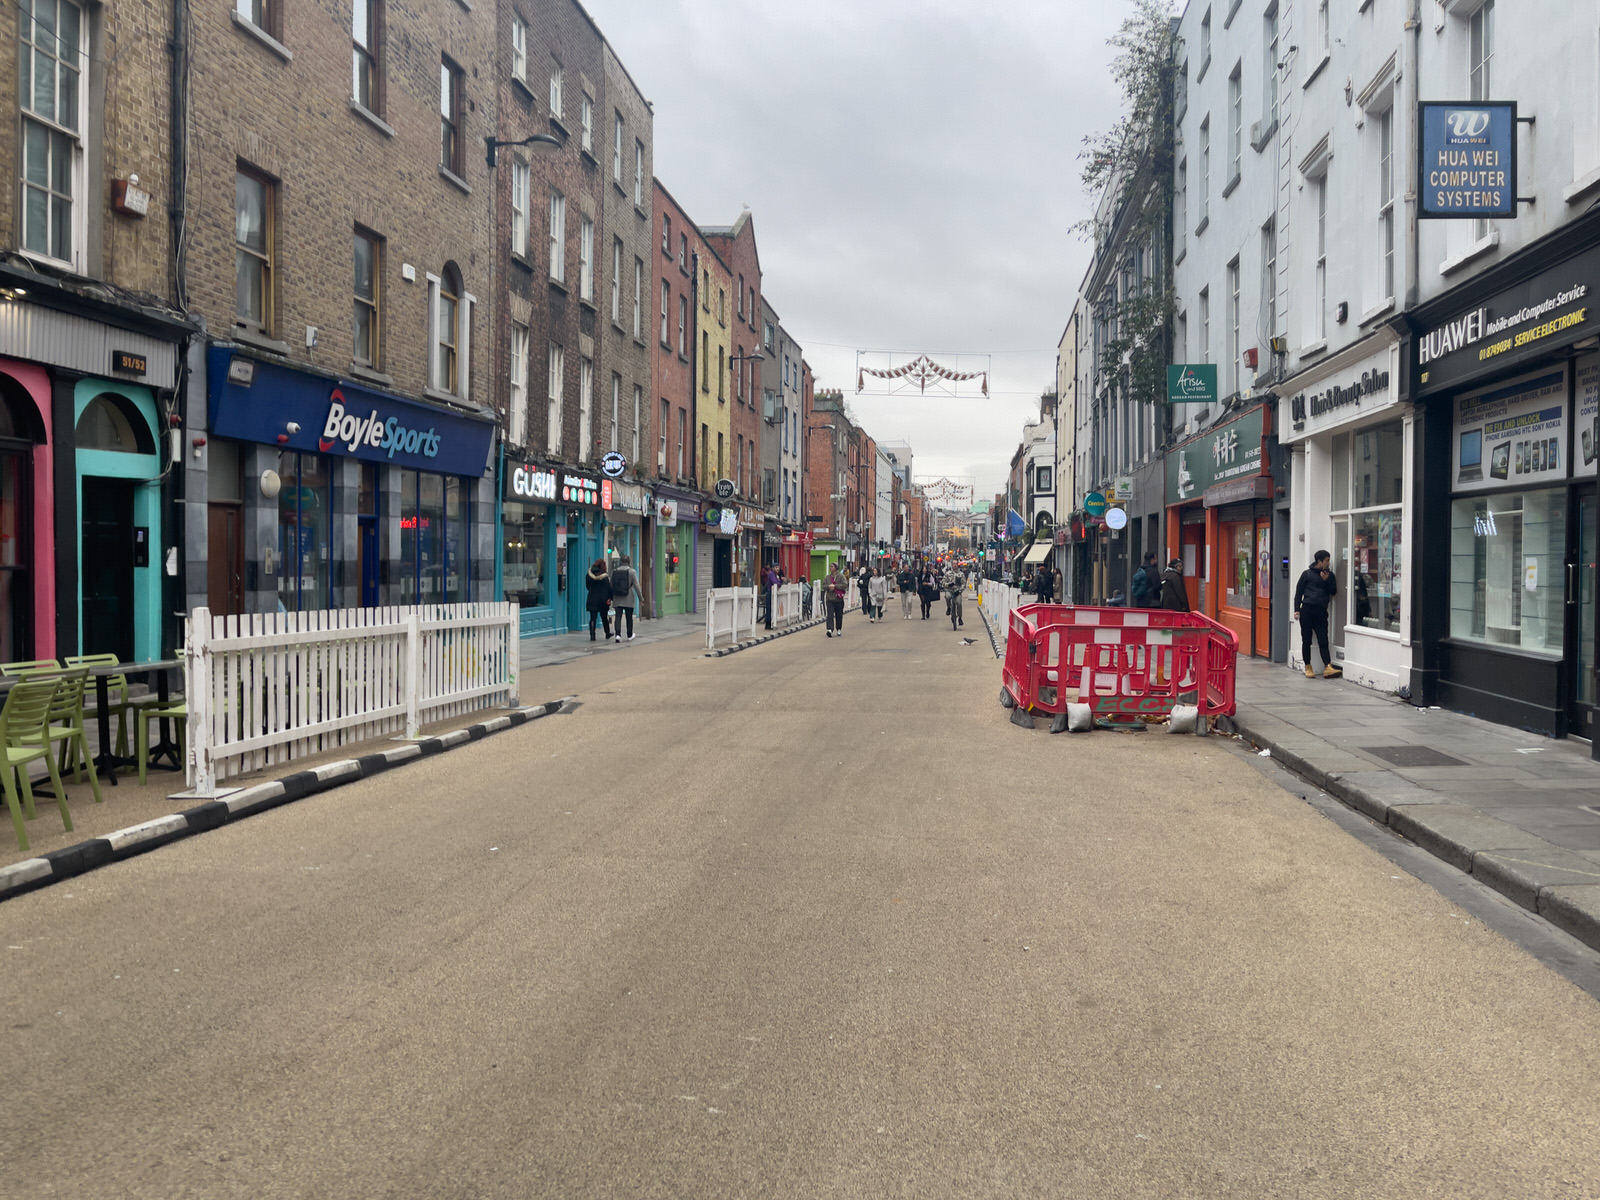 THE NEW STREET FURNITURE IS BEING INSTALLED ON CAPEL STREET [BUT THERE ARE FEW VISITORS TO BE SEEN TODAY] 004